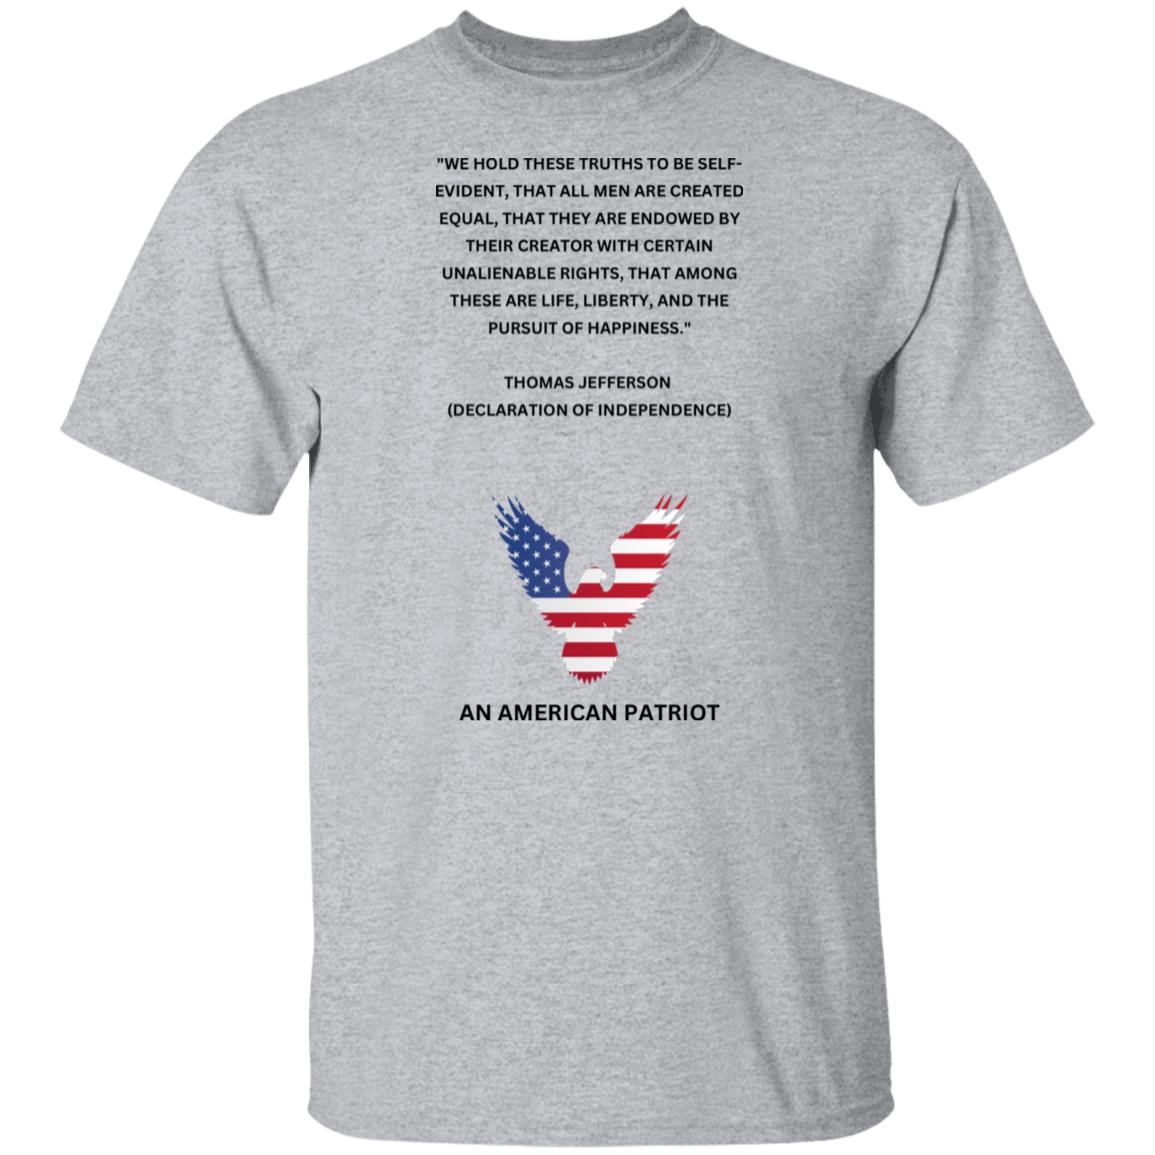 American patriot - Independence - short sleeve